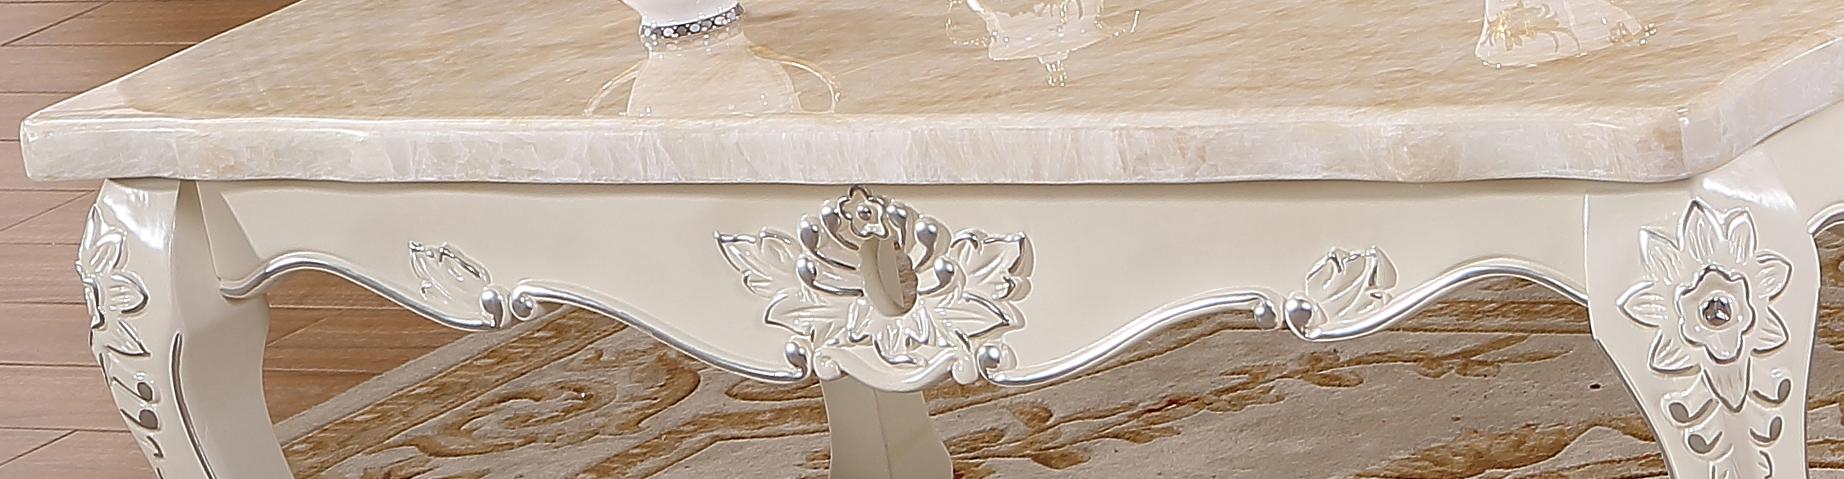 

    
Meridian Venice Coffee Table in Pearl White Hand Crafted Traditional Style
